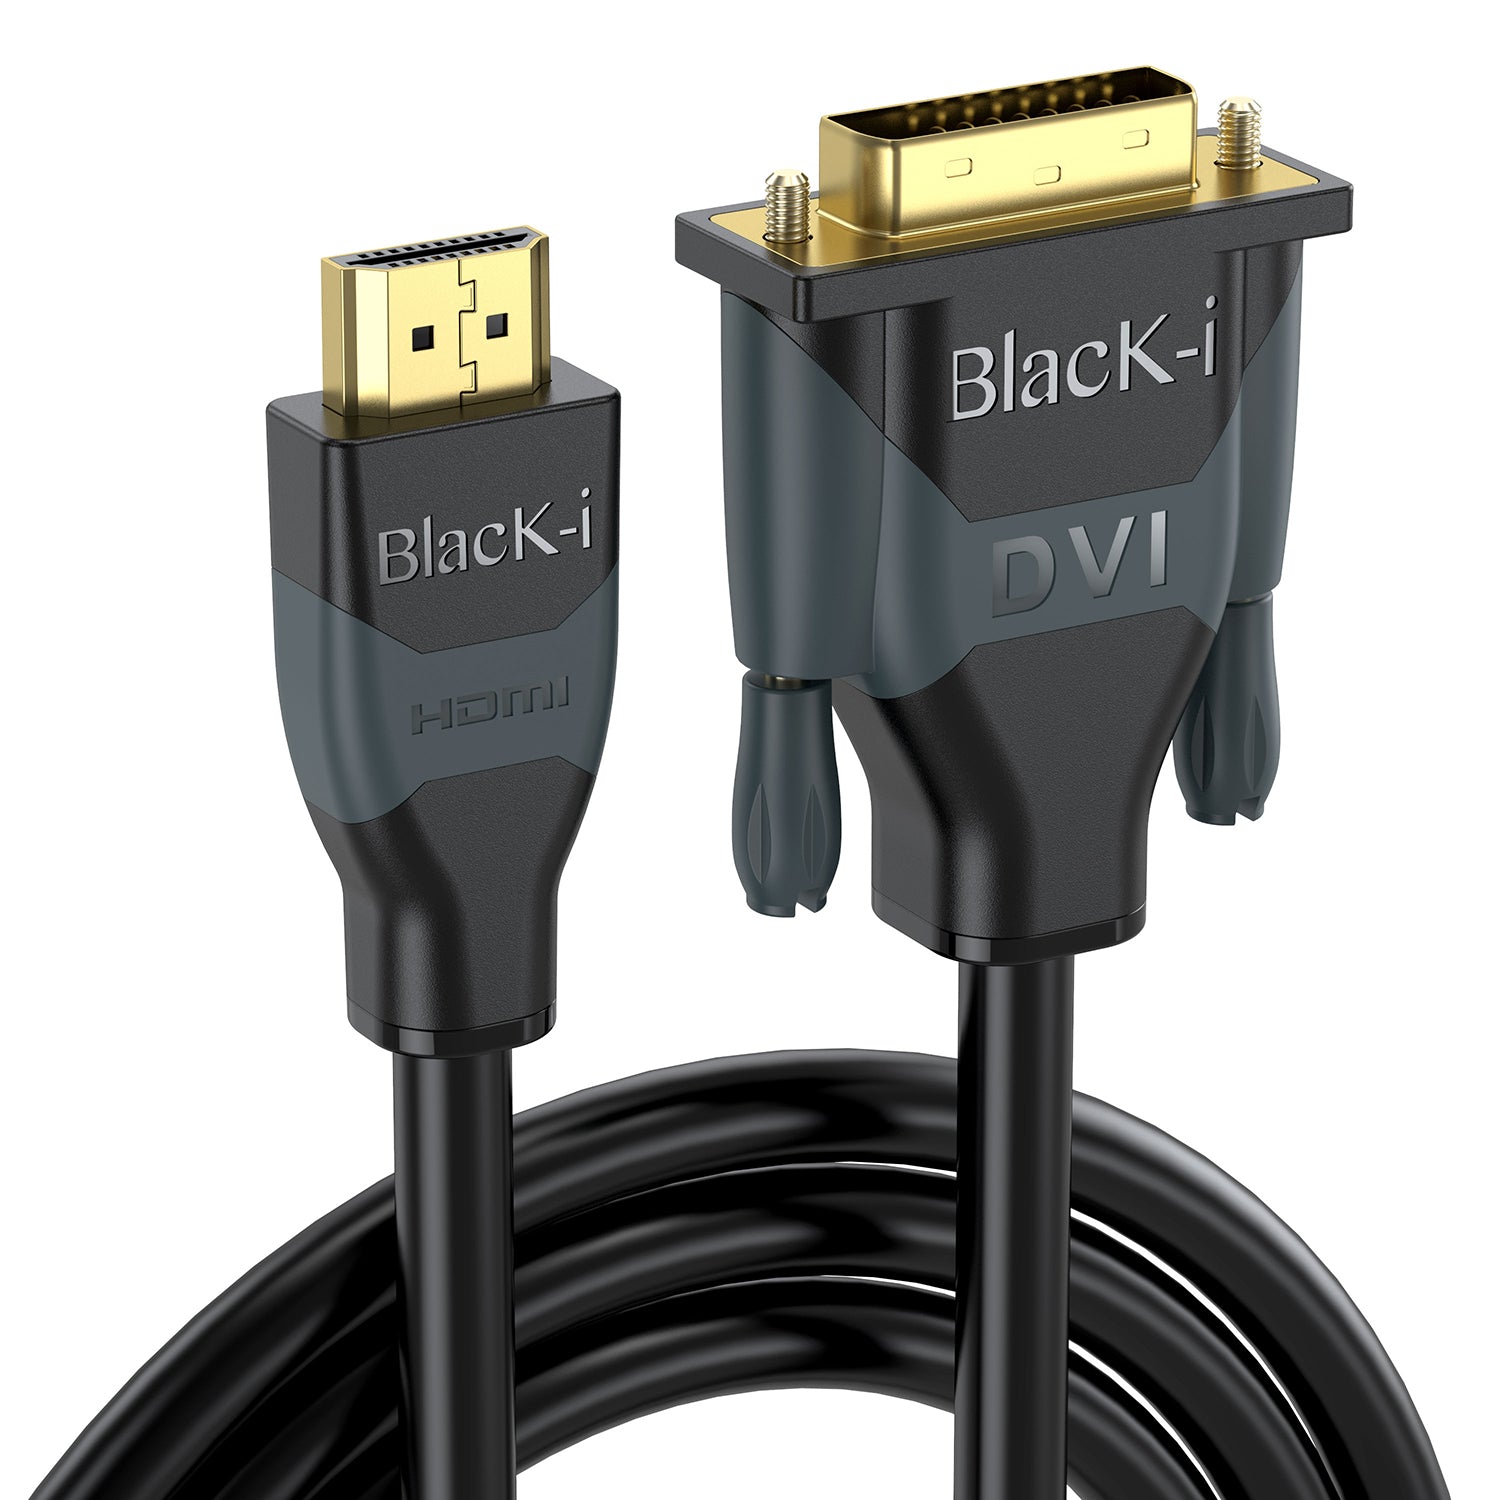 Black-i HDMI to DVI Cable – High-Definition Connectivity for Crisp Visuals and Seamless Multimedia Transmission